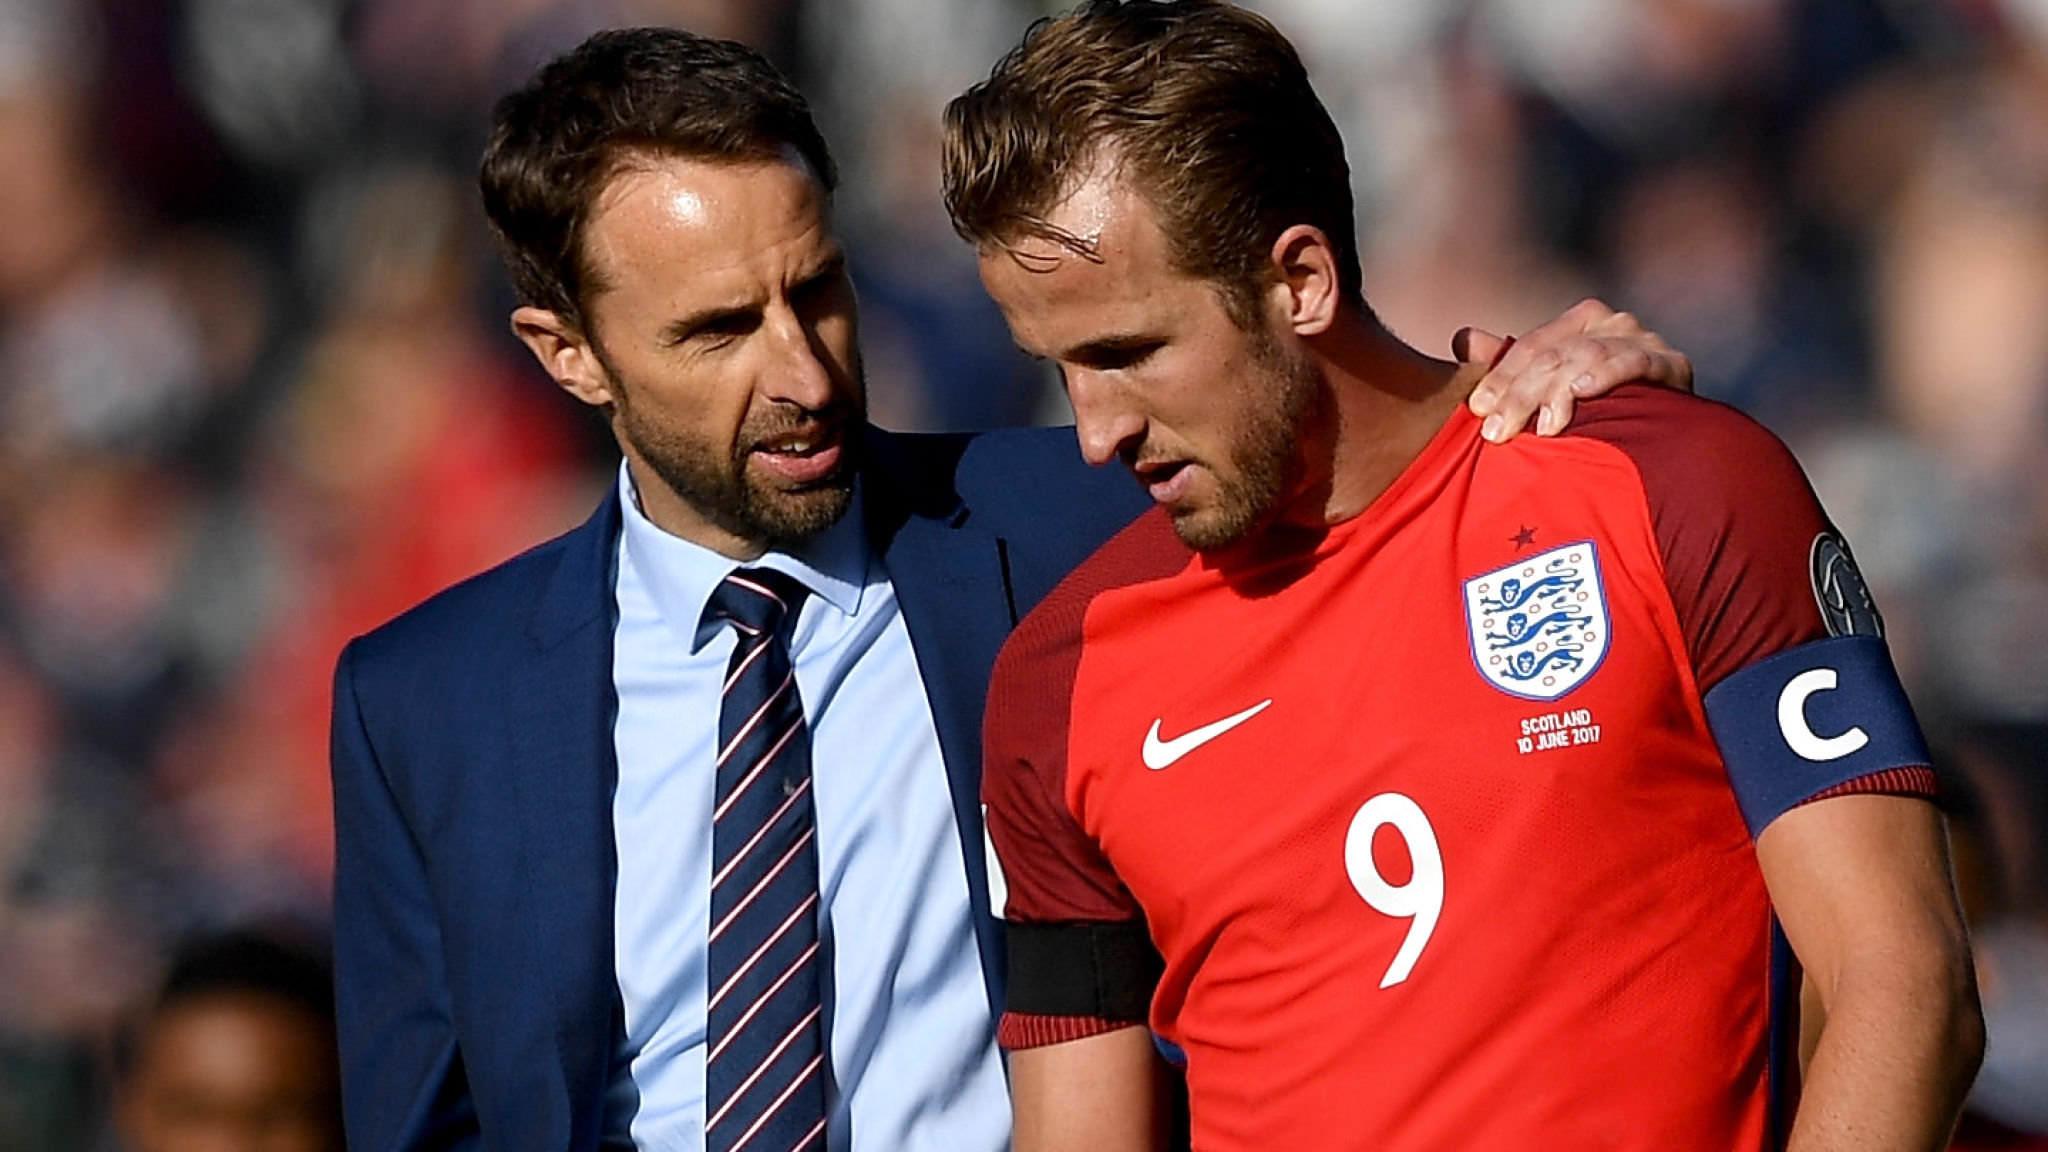 At World Cup in Russia Harry Kane to captain England